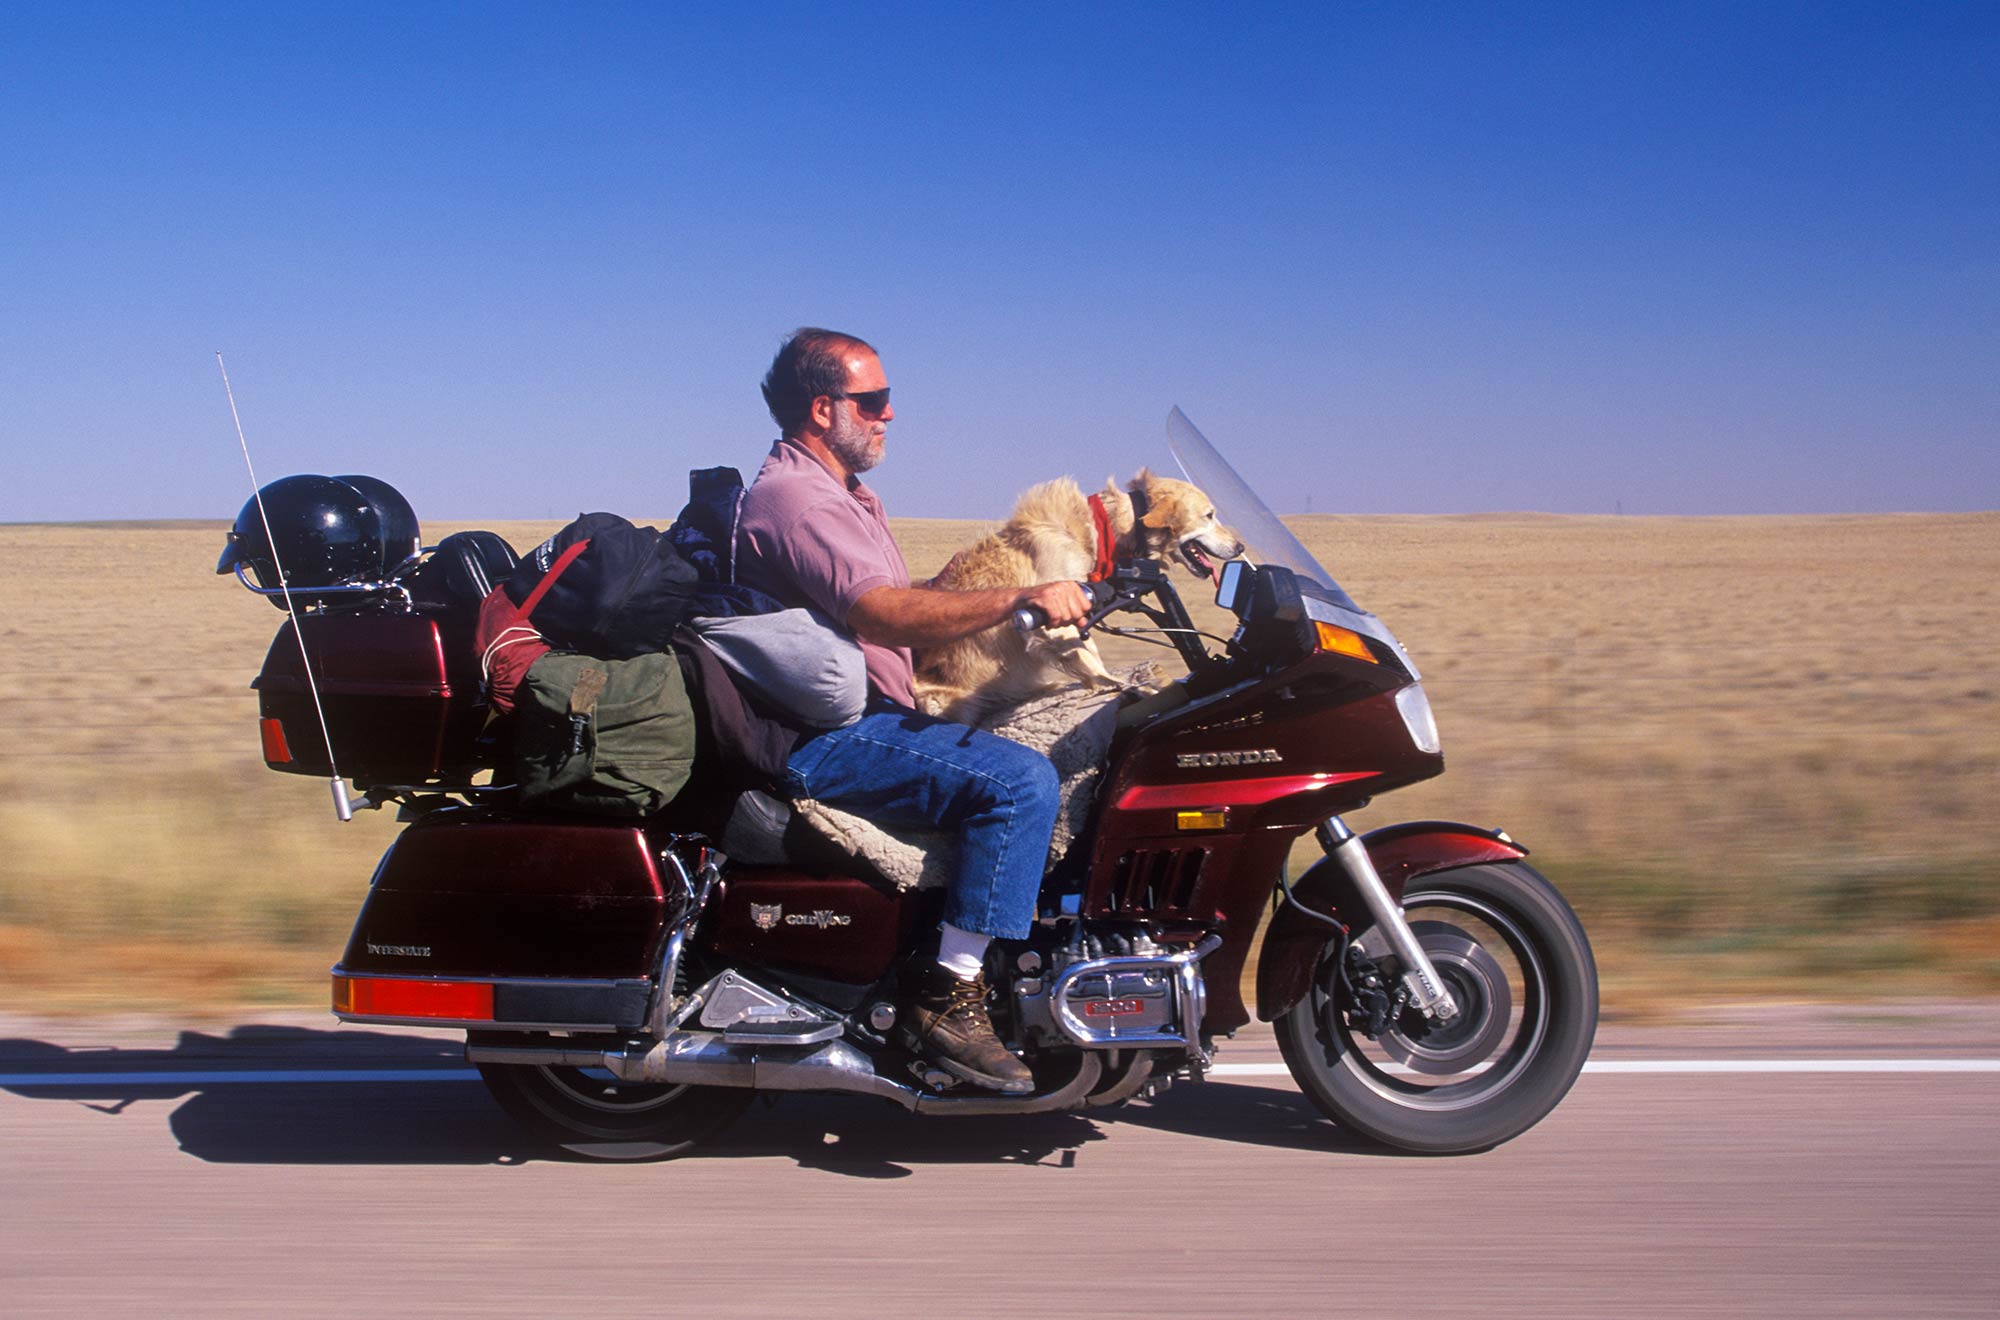 This rider and his dog are ready for the long haul, protected from the wind and elements by the Honda Gold Wing’s tall windshield